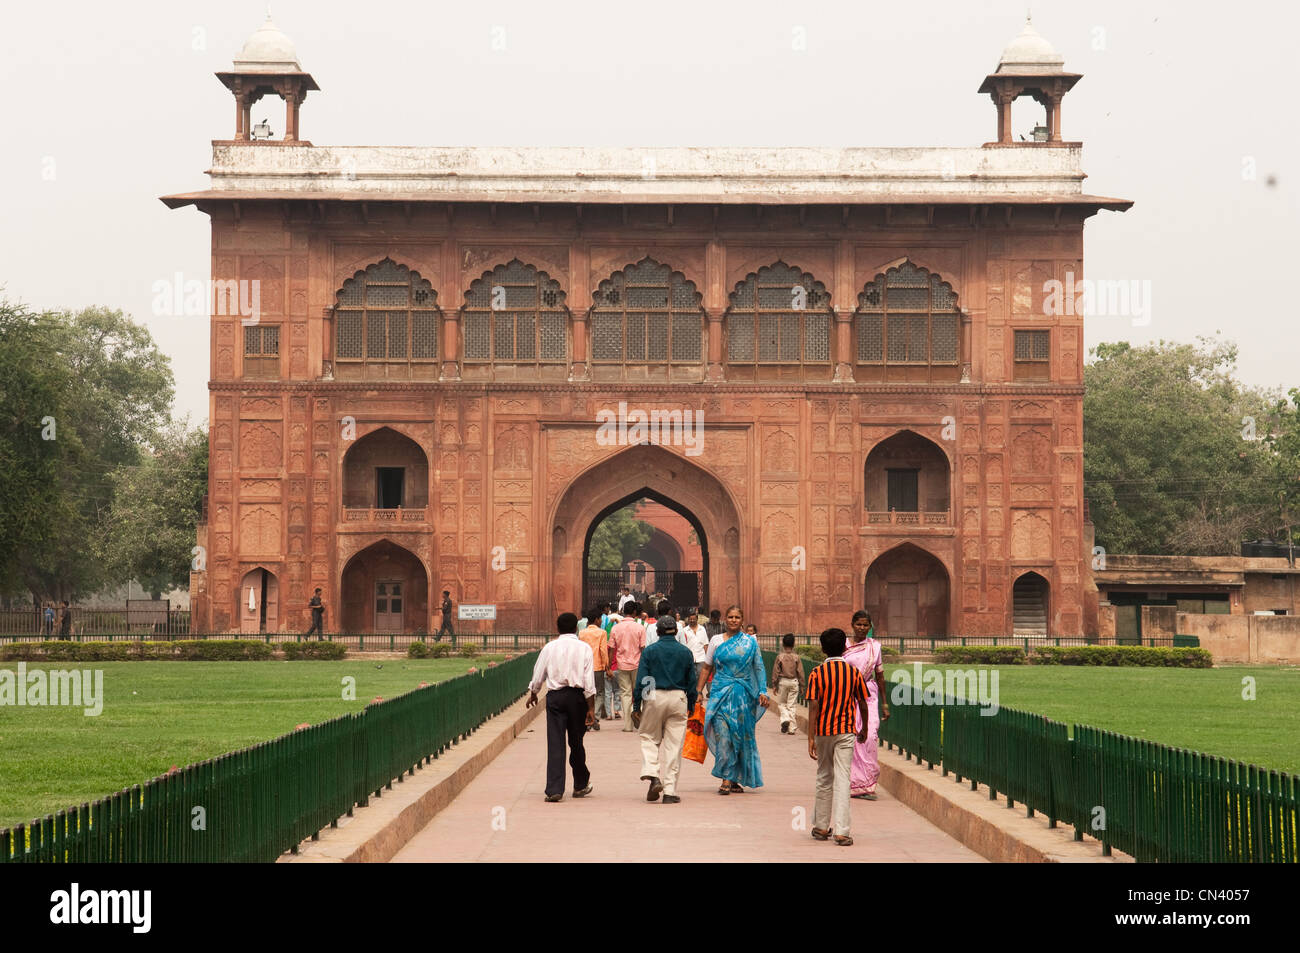 Naubat Khan or Naqqar Khana, The Drum House at the Red Fort, Delhi, Architecture in India Stock Photo